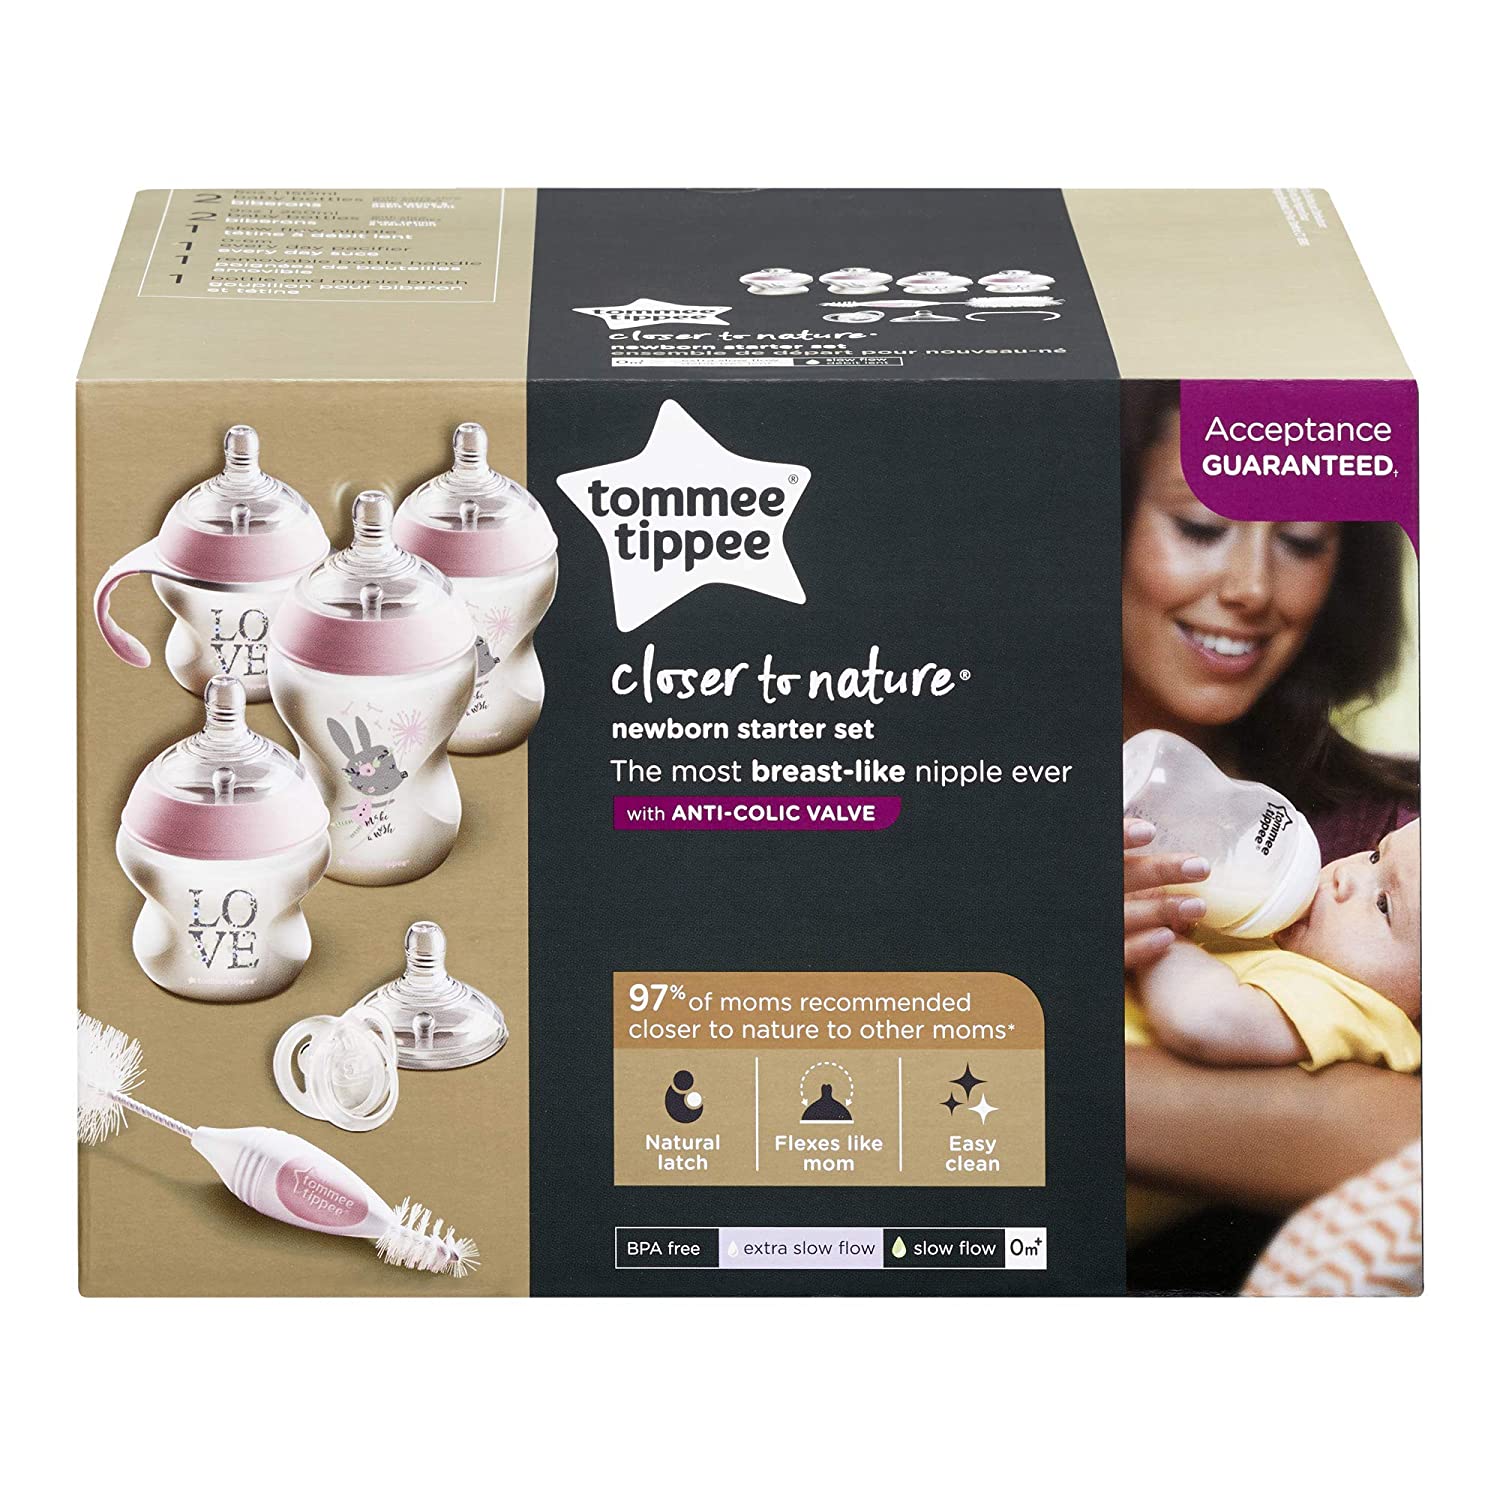 Tommee Tippee Closer to Nature Newborn Set - Pink